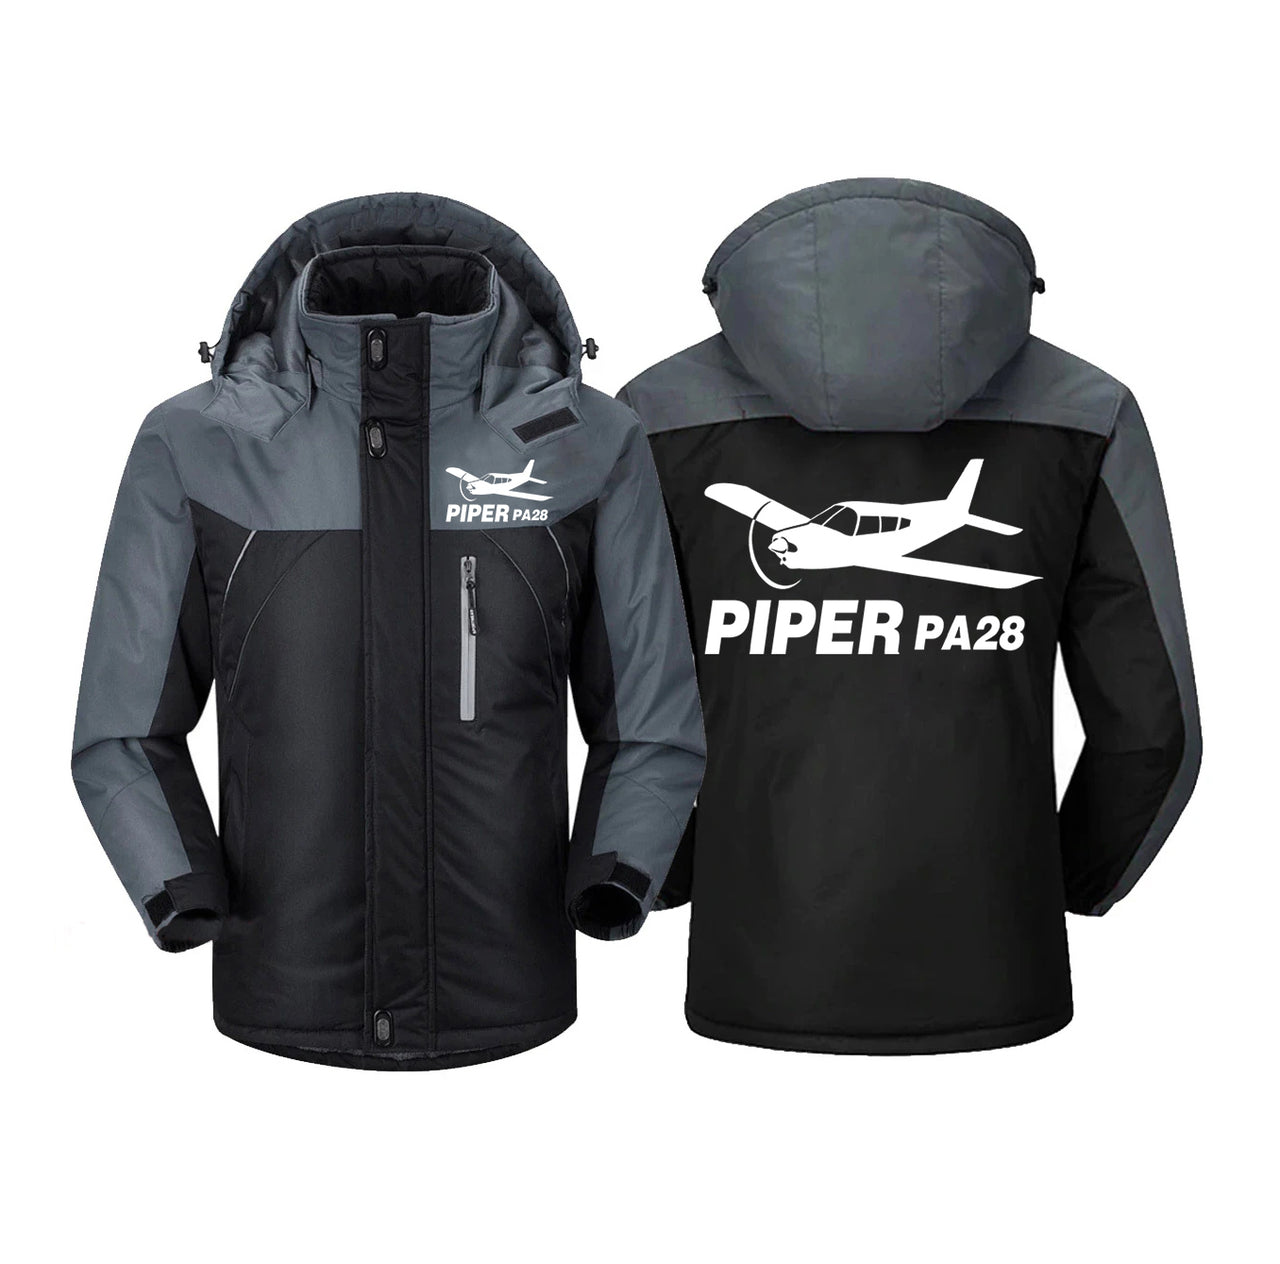 The Piper PA28 Designed Thick Winter Jackets